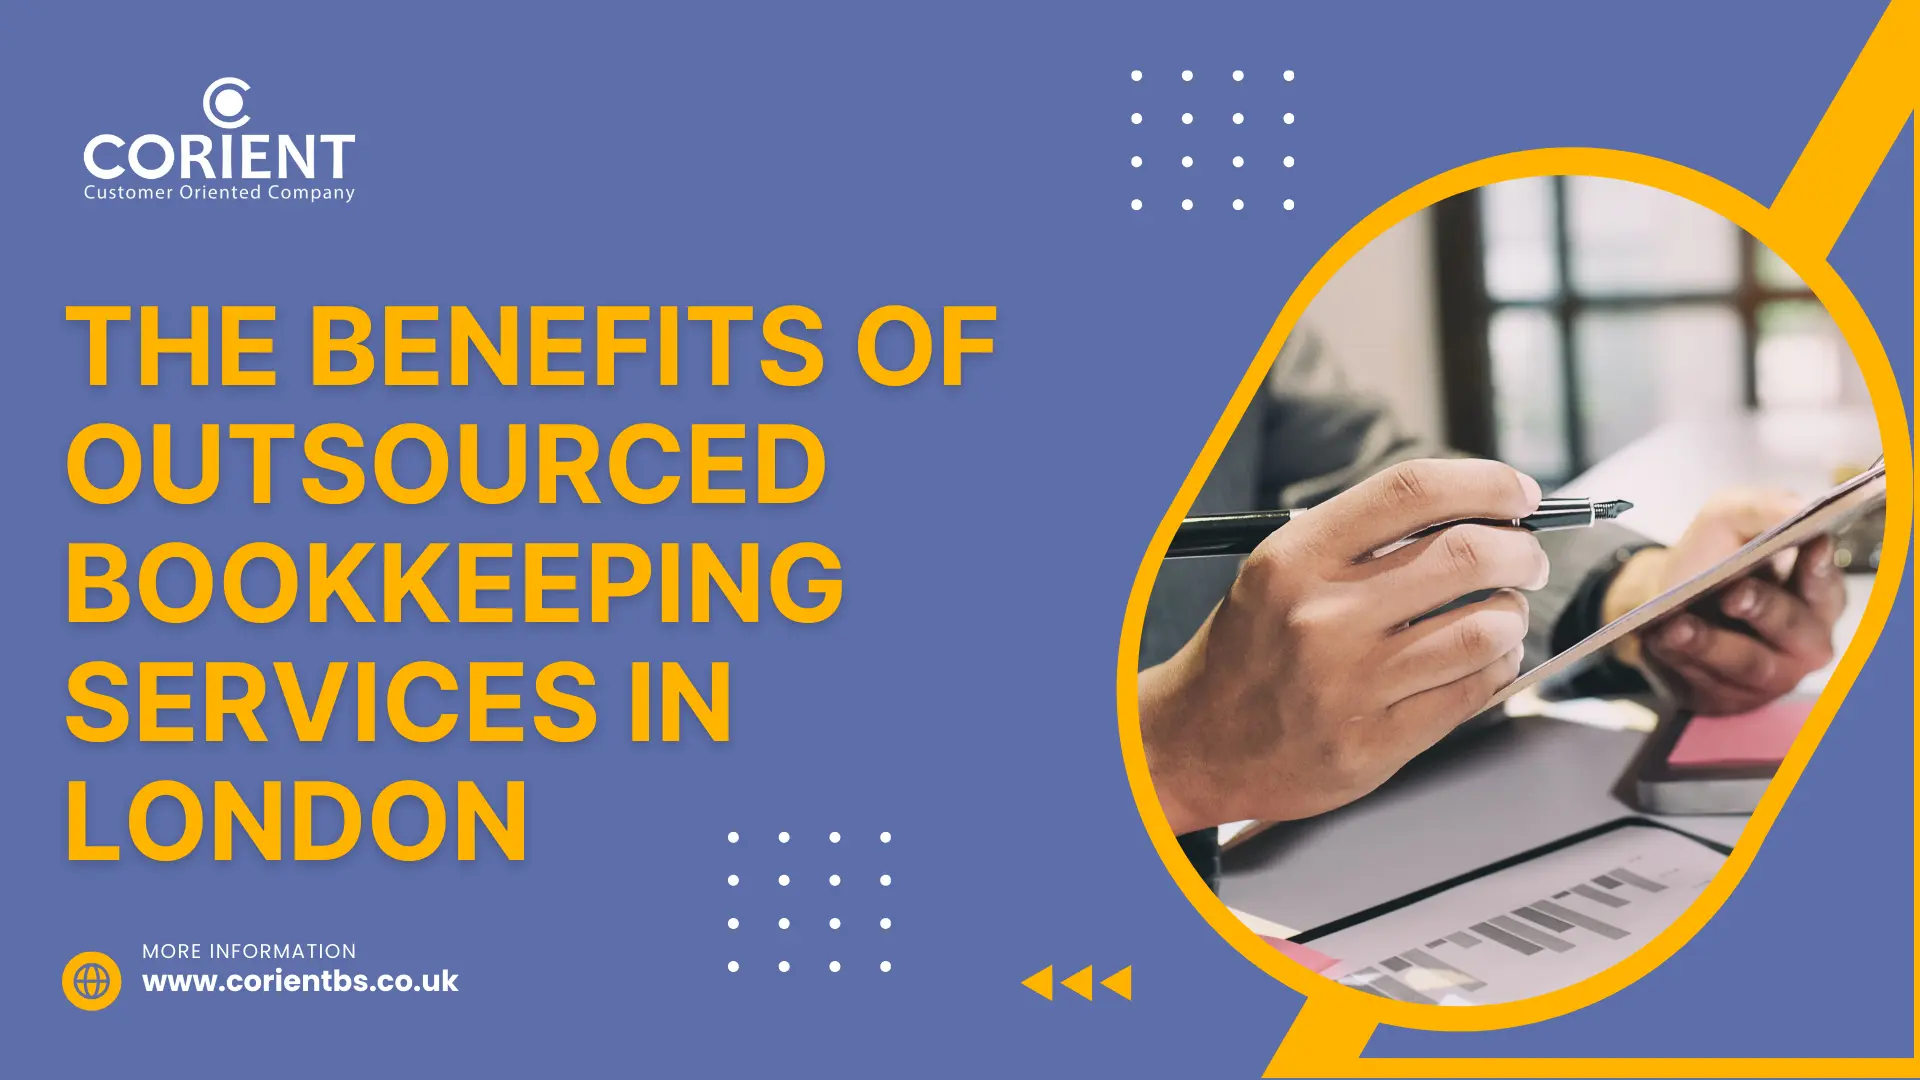 The benefits of hiring bookkeeping services in London for small businesses.